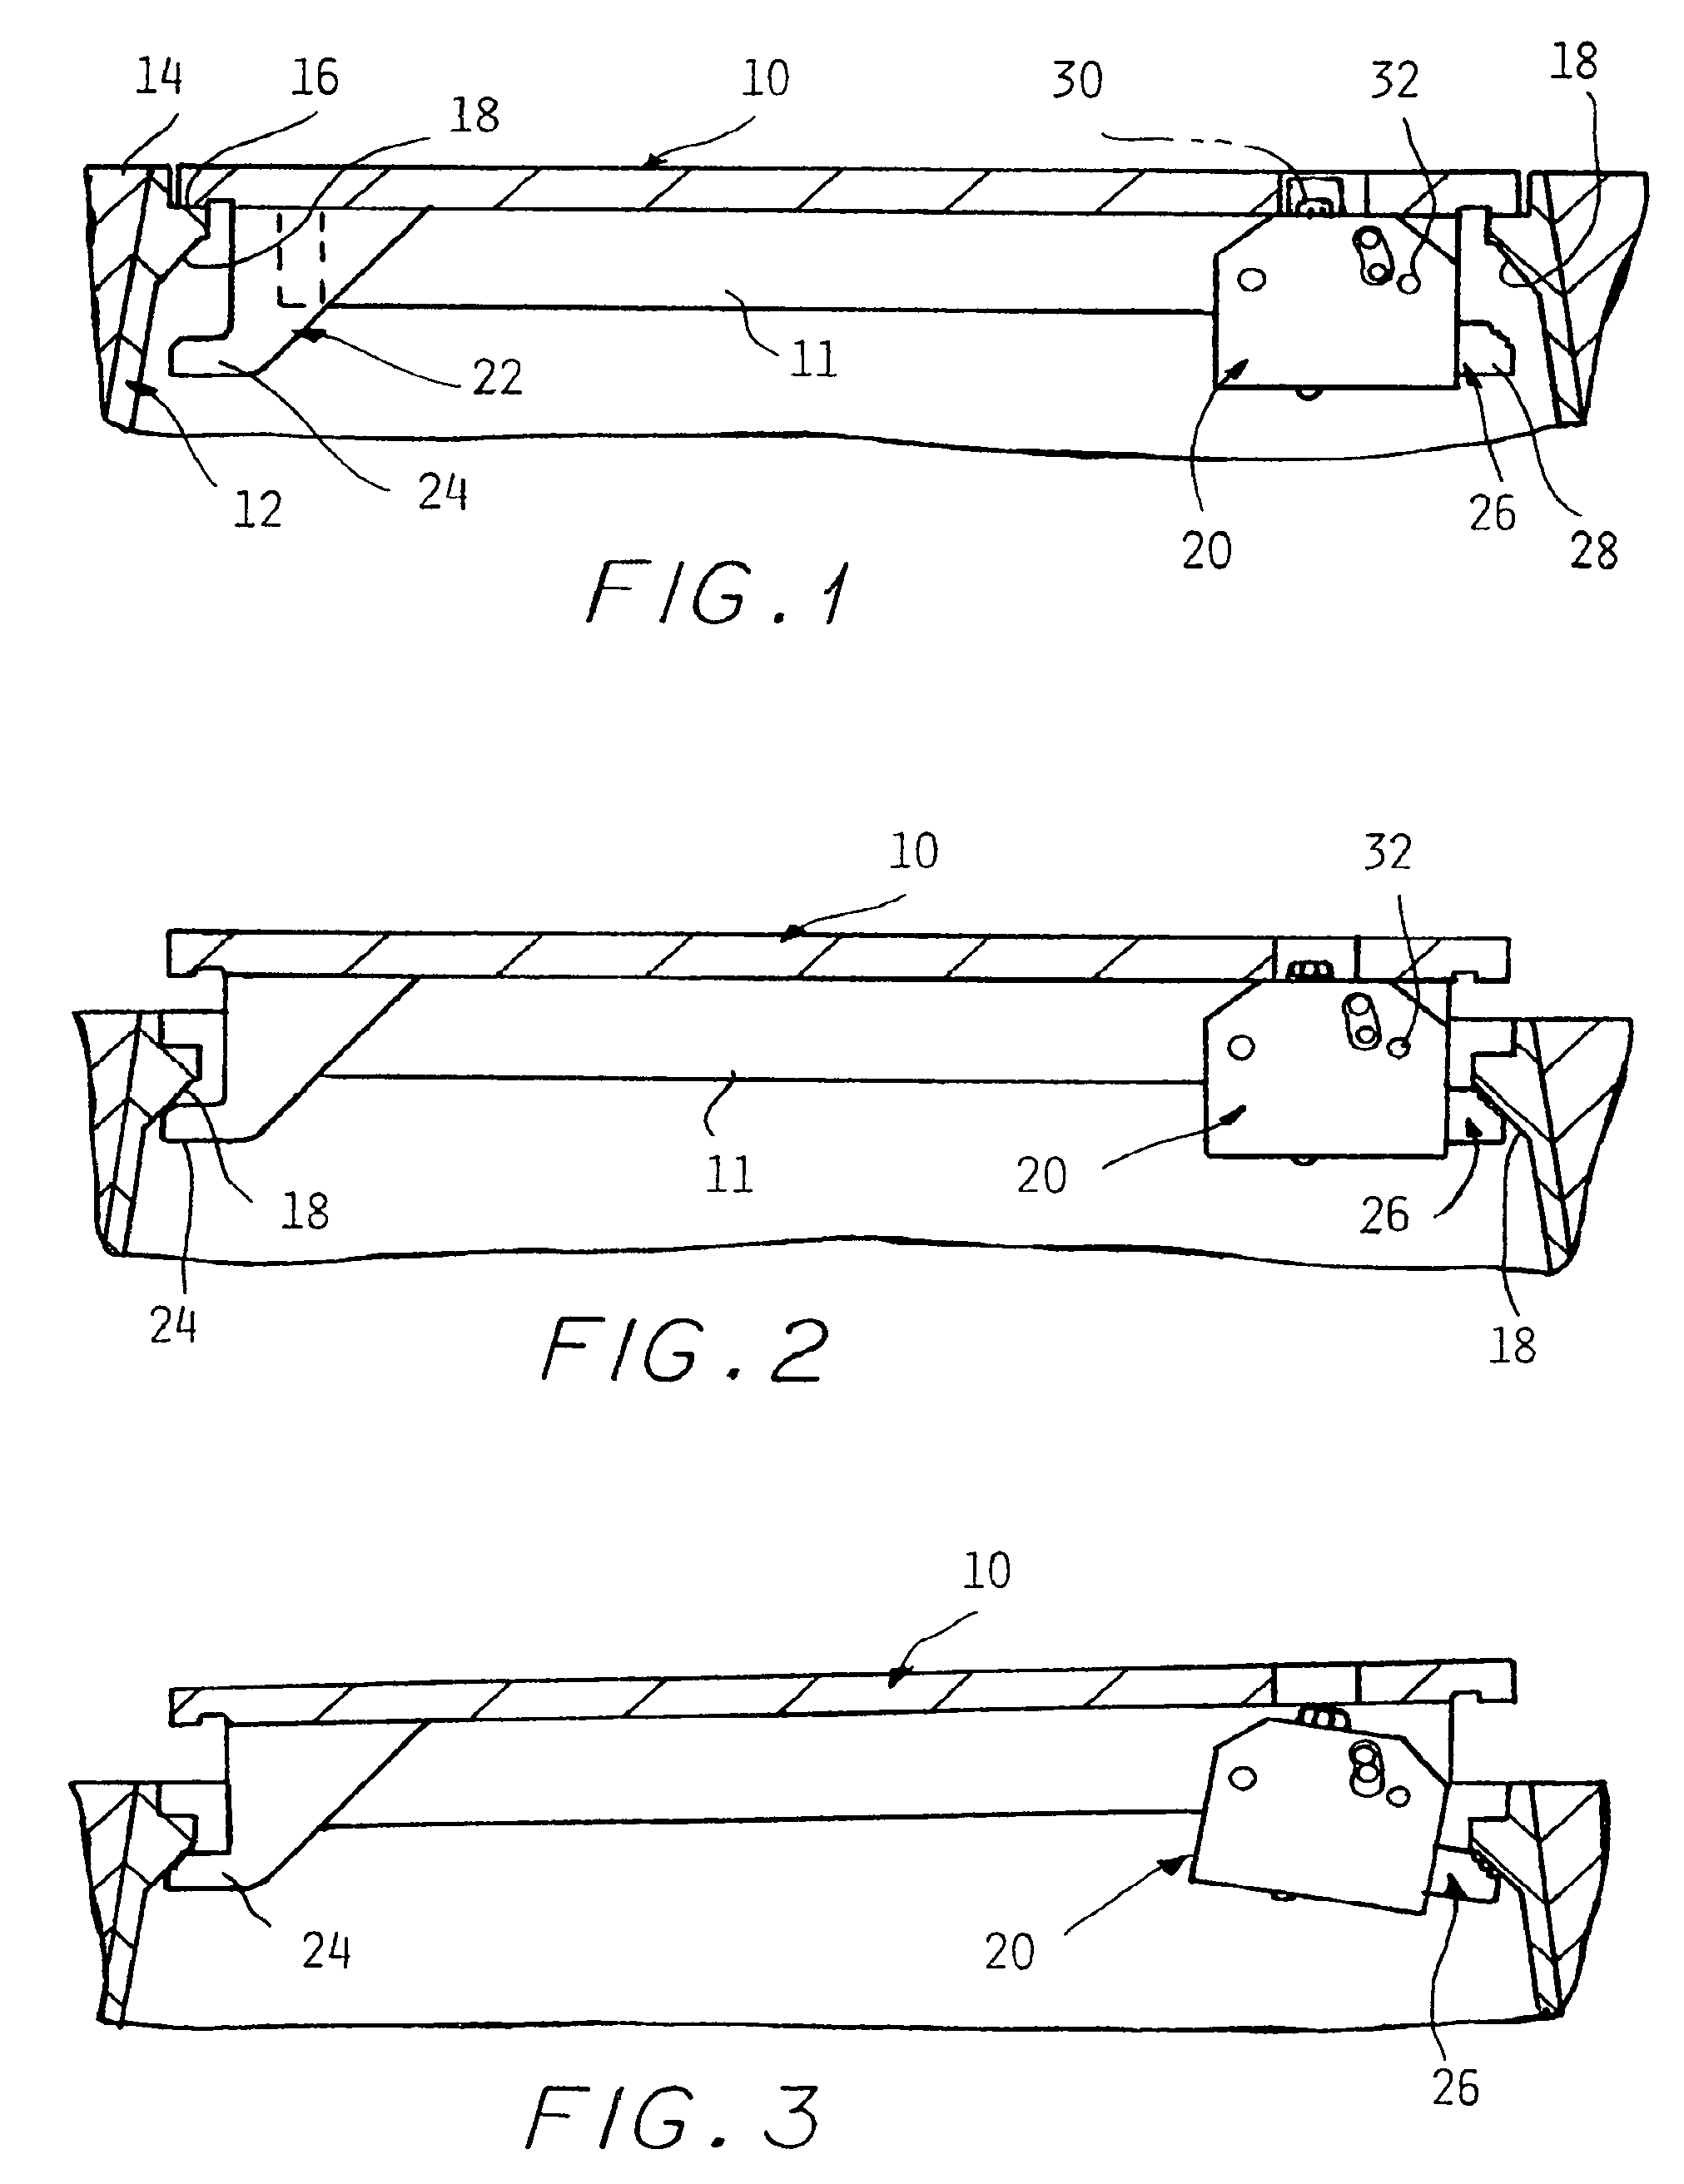 Method of controllably venting gases generated by explosions in a manhole space